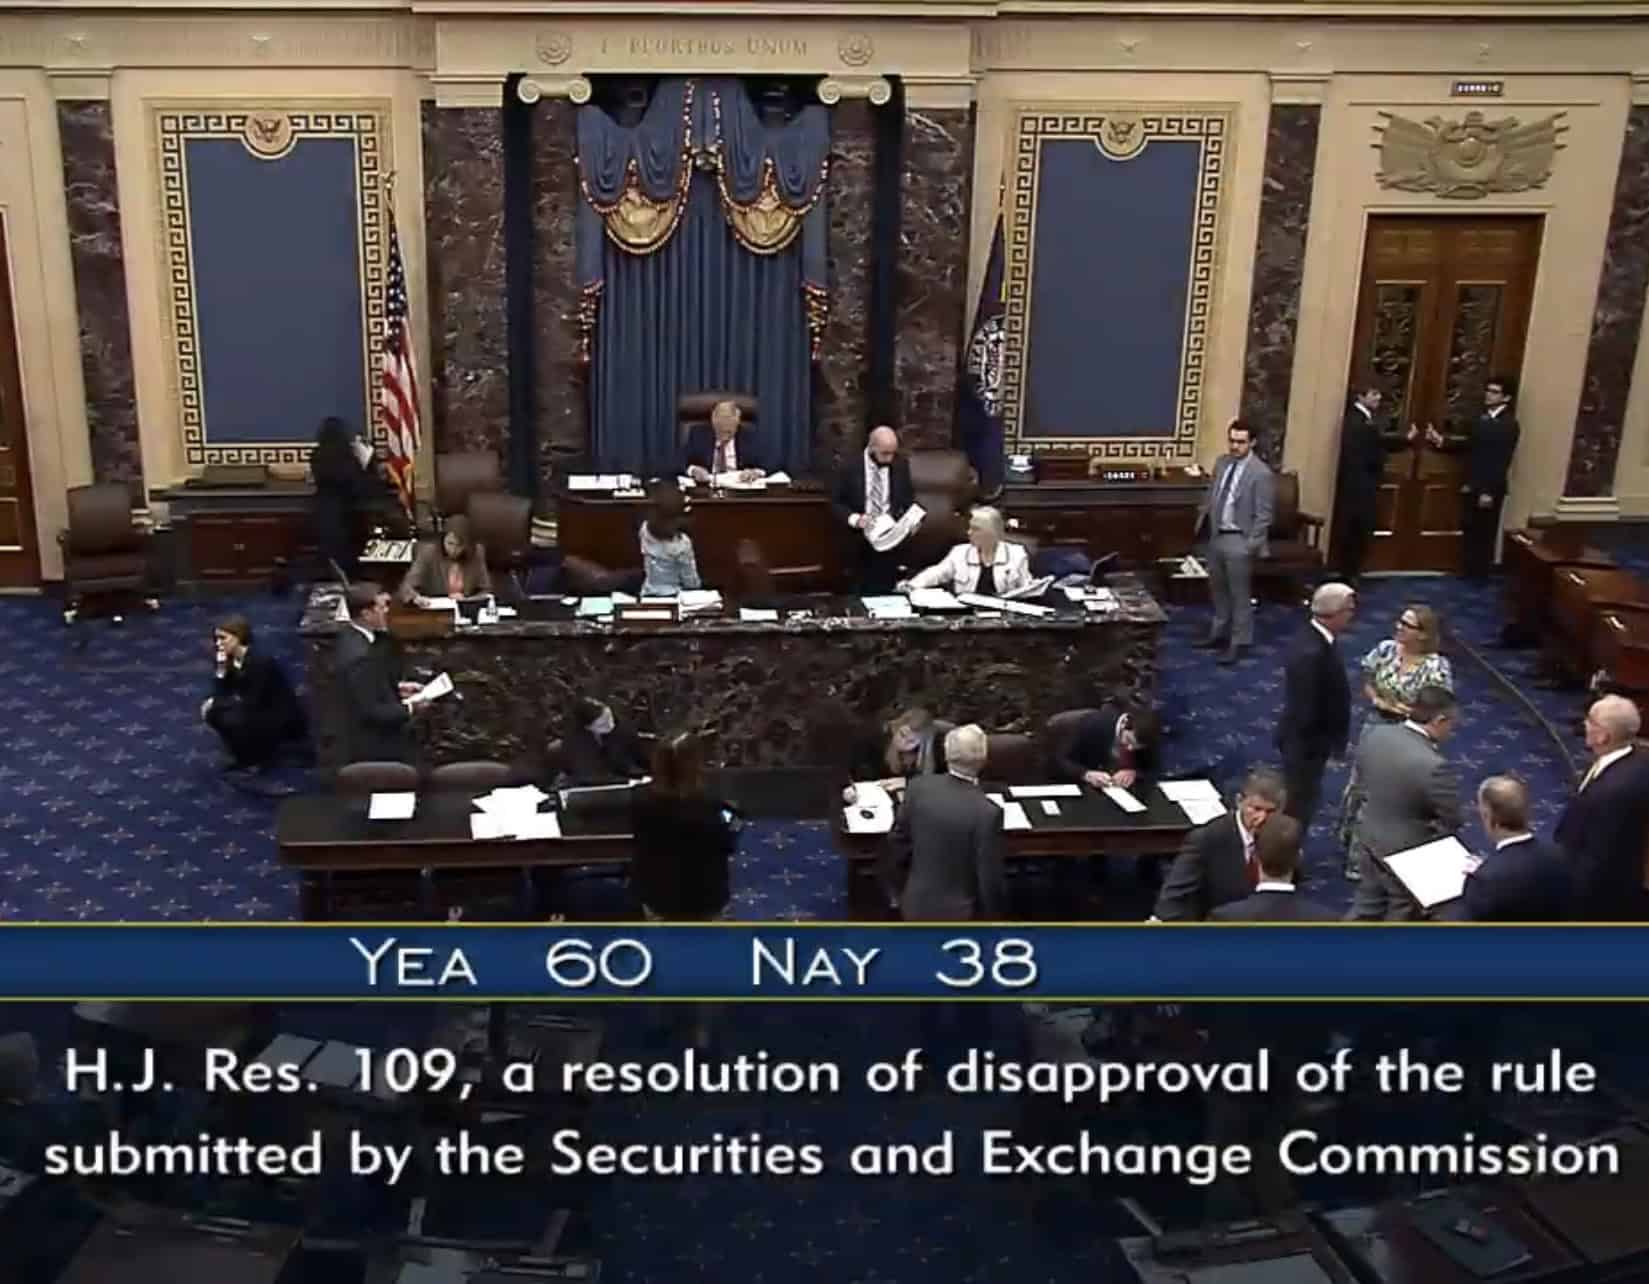 US Senate Approves Join Resolution That Overturns SAB 121 - The SEC Rule That Prevents Certain Regulated Firms From...